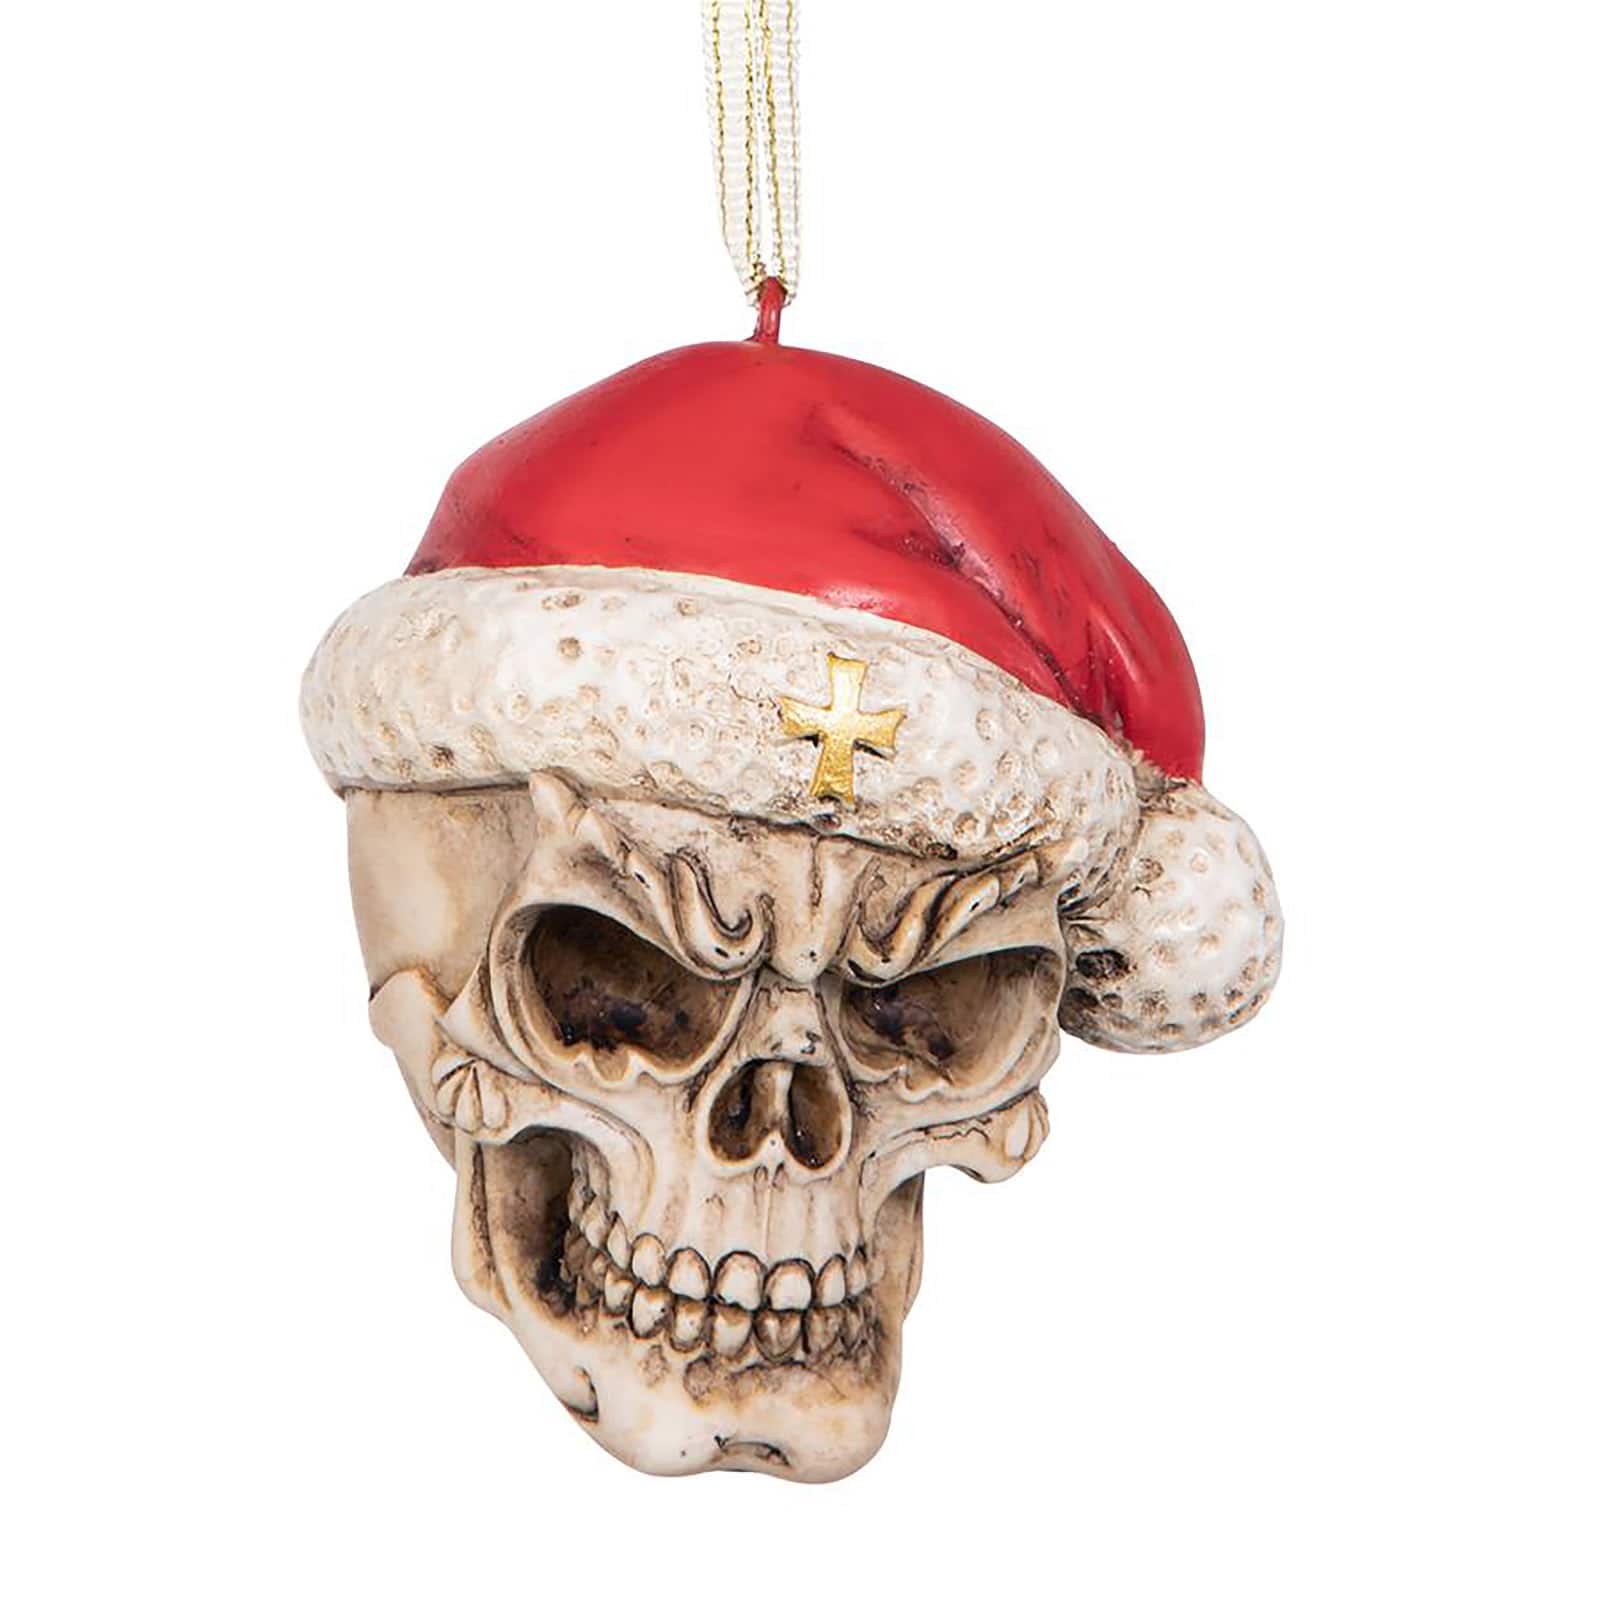 Design Toscano Skelly Claus II Holiday Skeleton Ornament